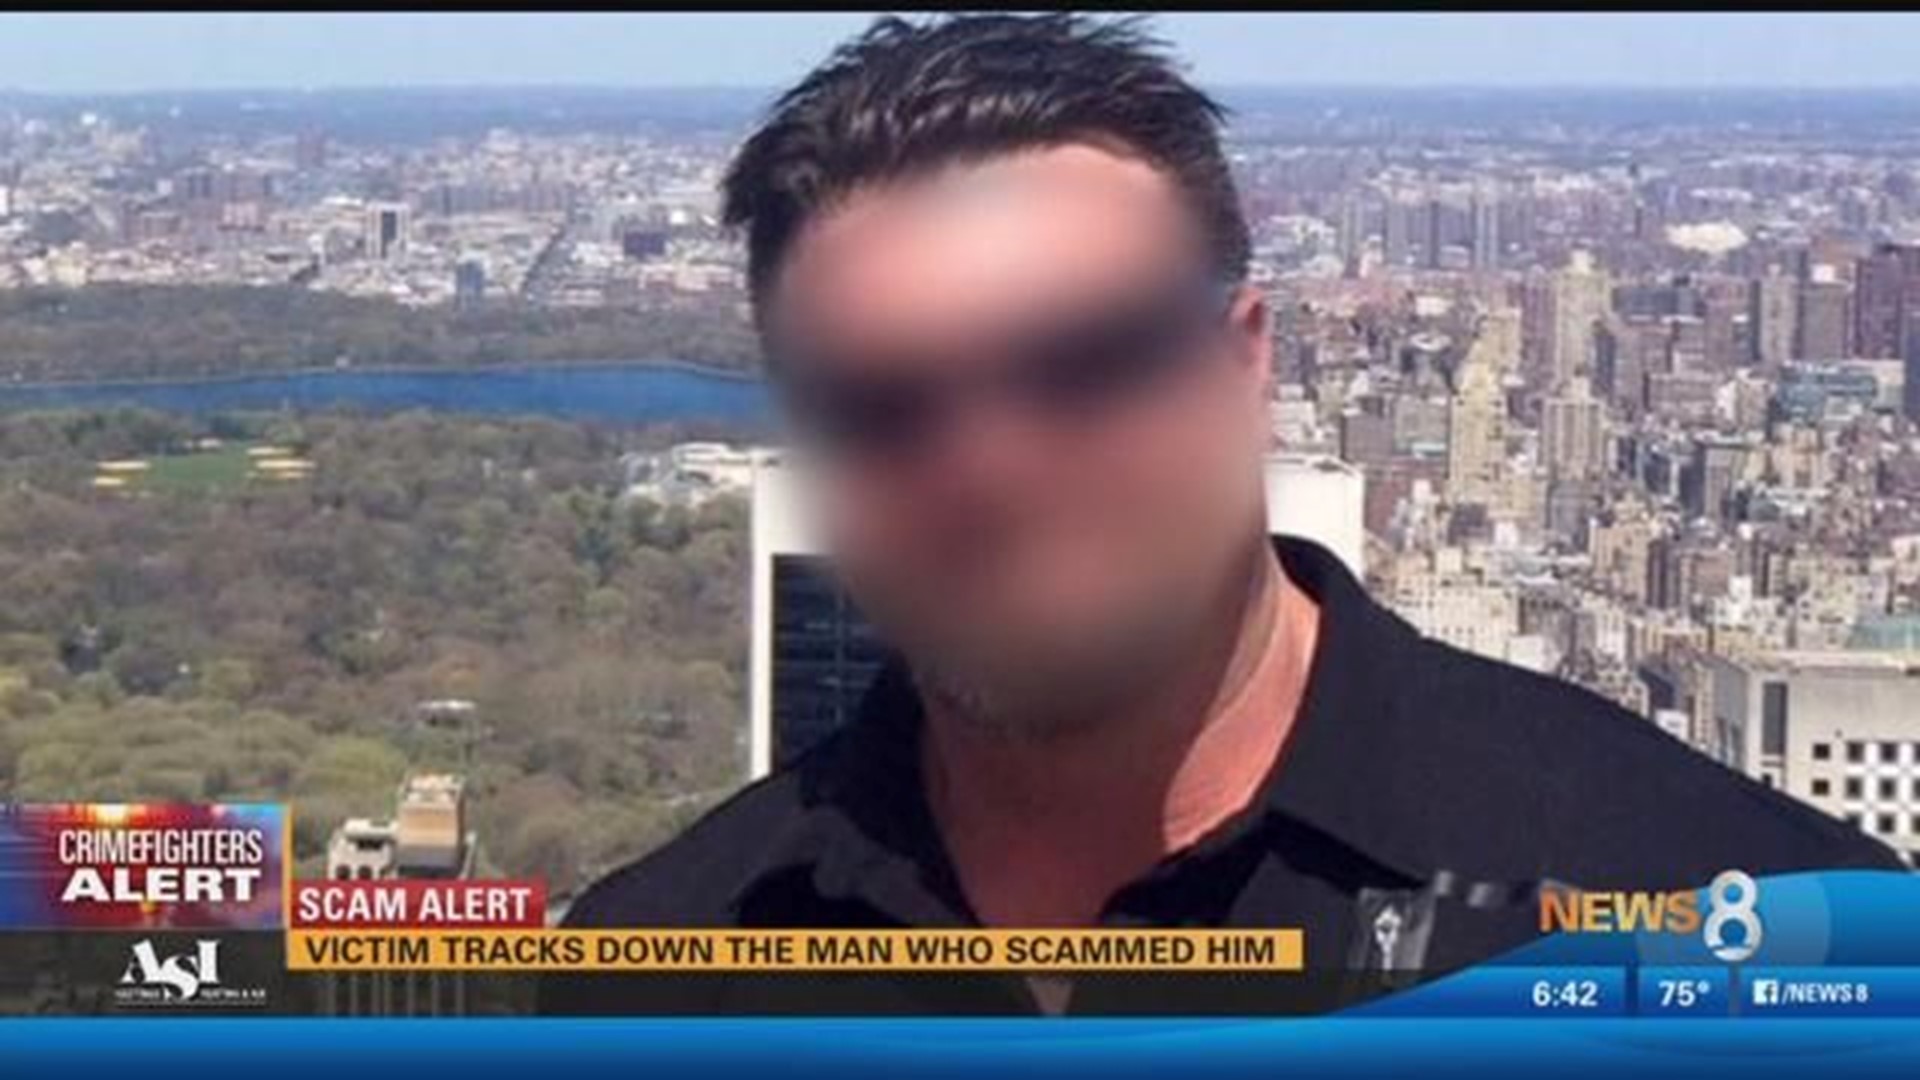 Scam Alert Victim Tracks Down The Man Who Scammed Him In Kearny Mesa